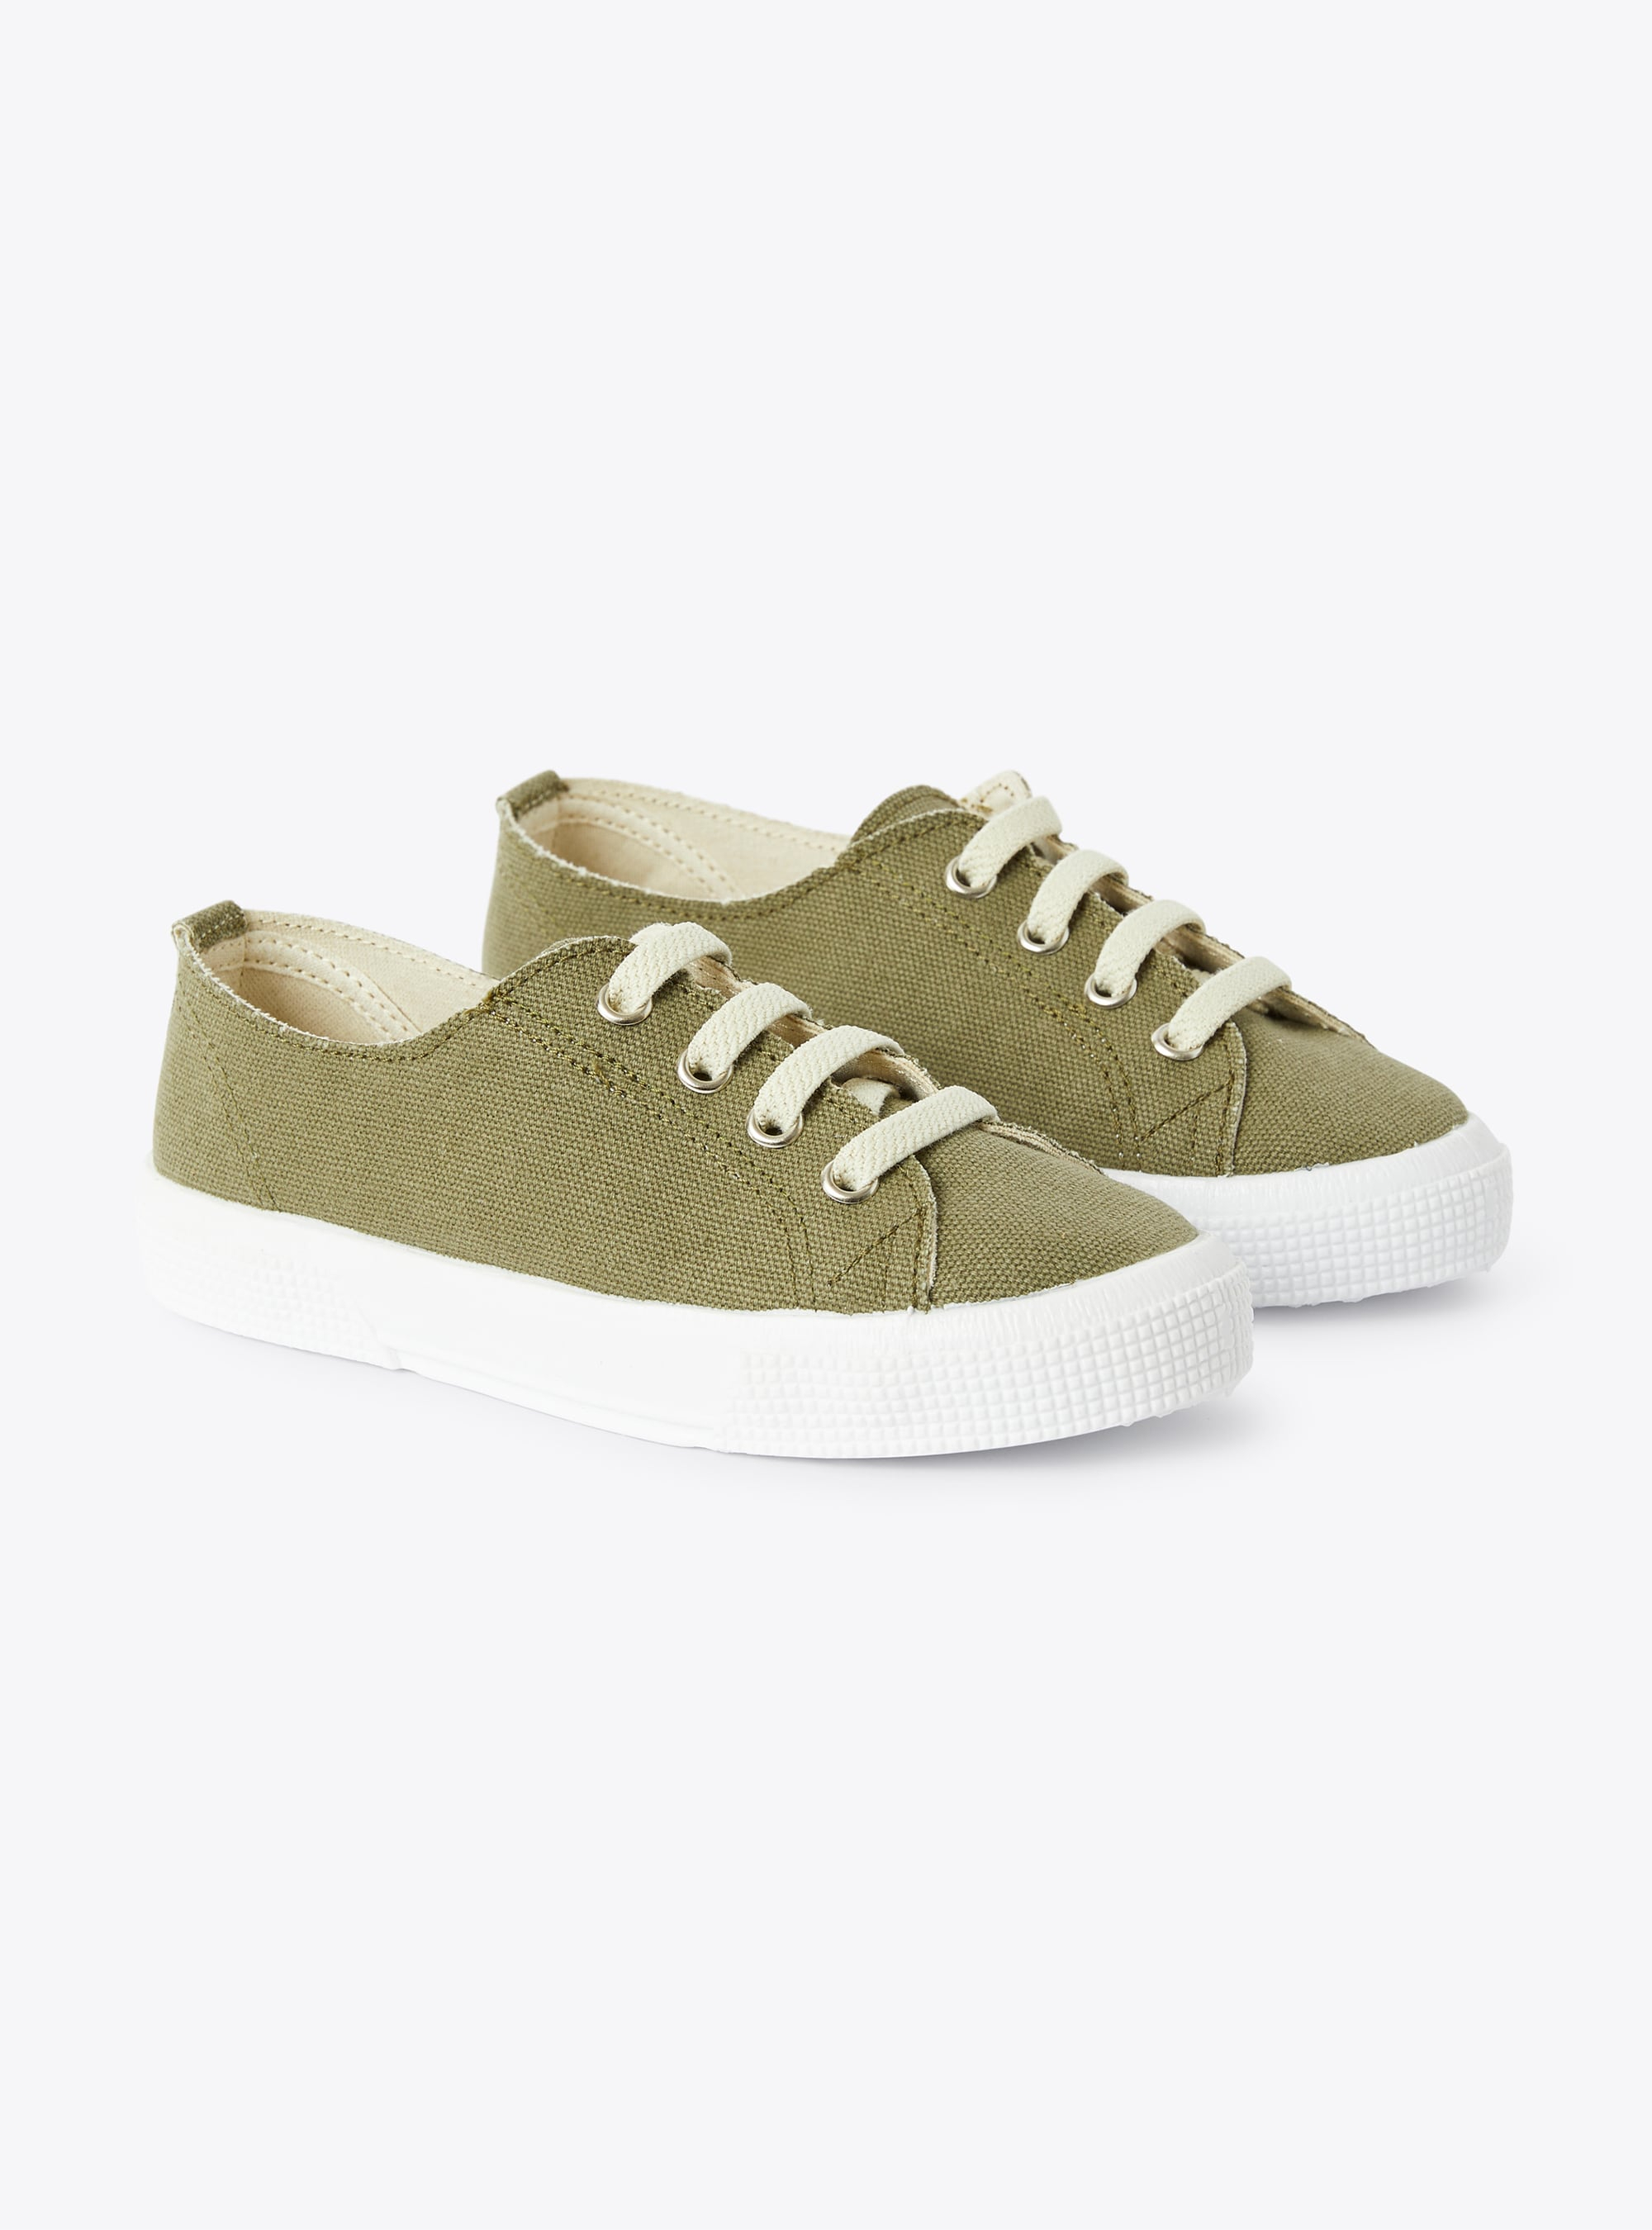 Sneakers in sage-green canvas - Shoes - Il Gufo